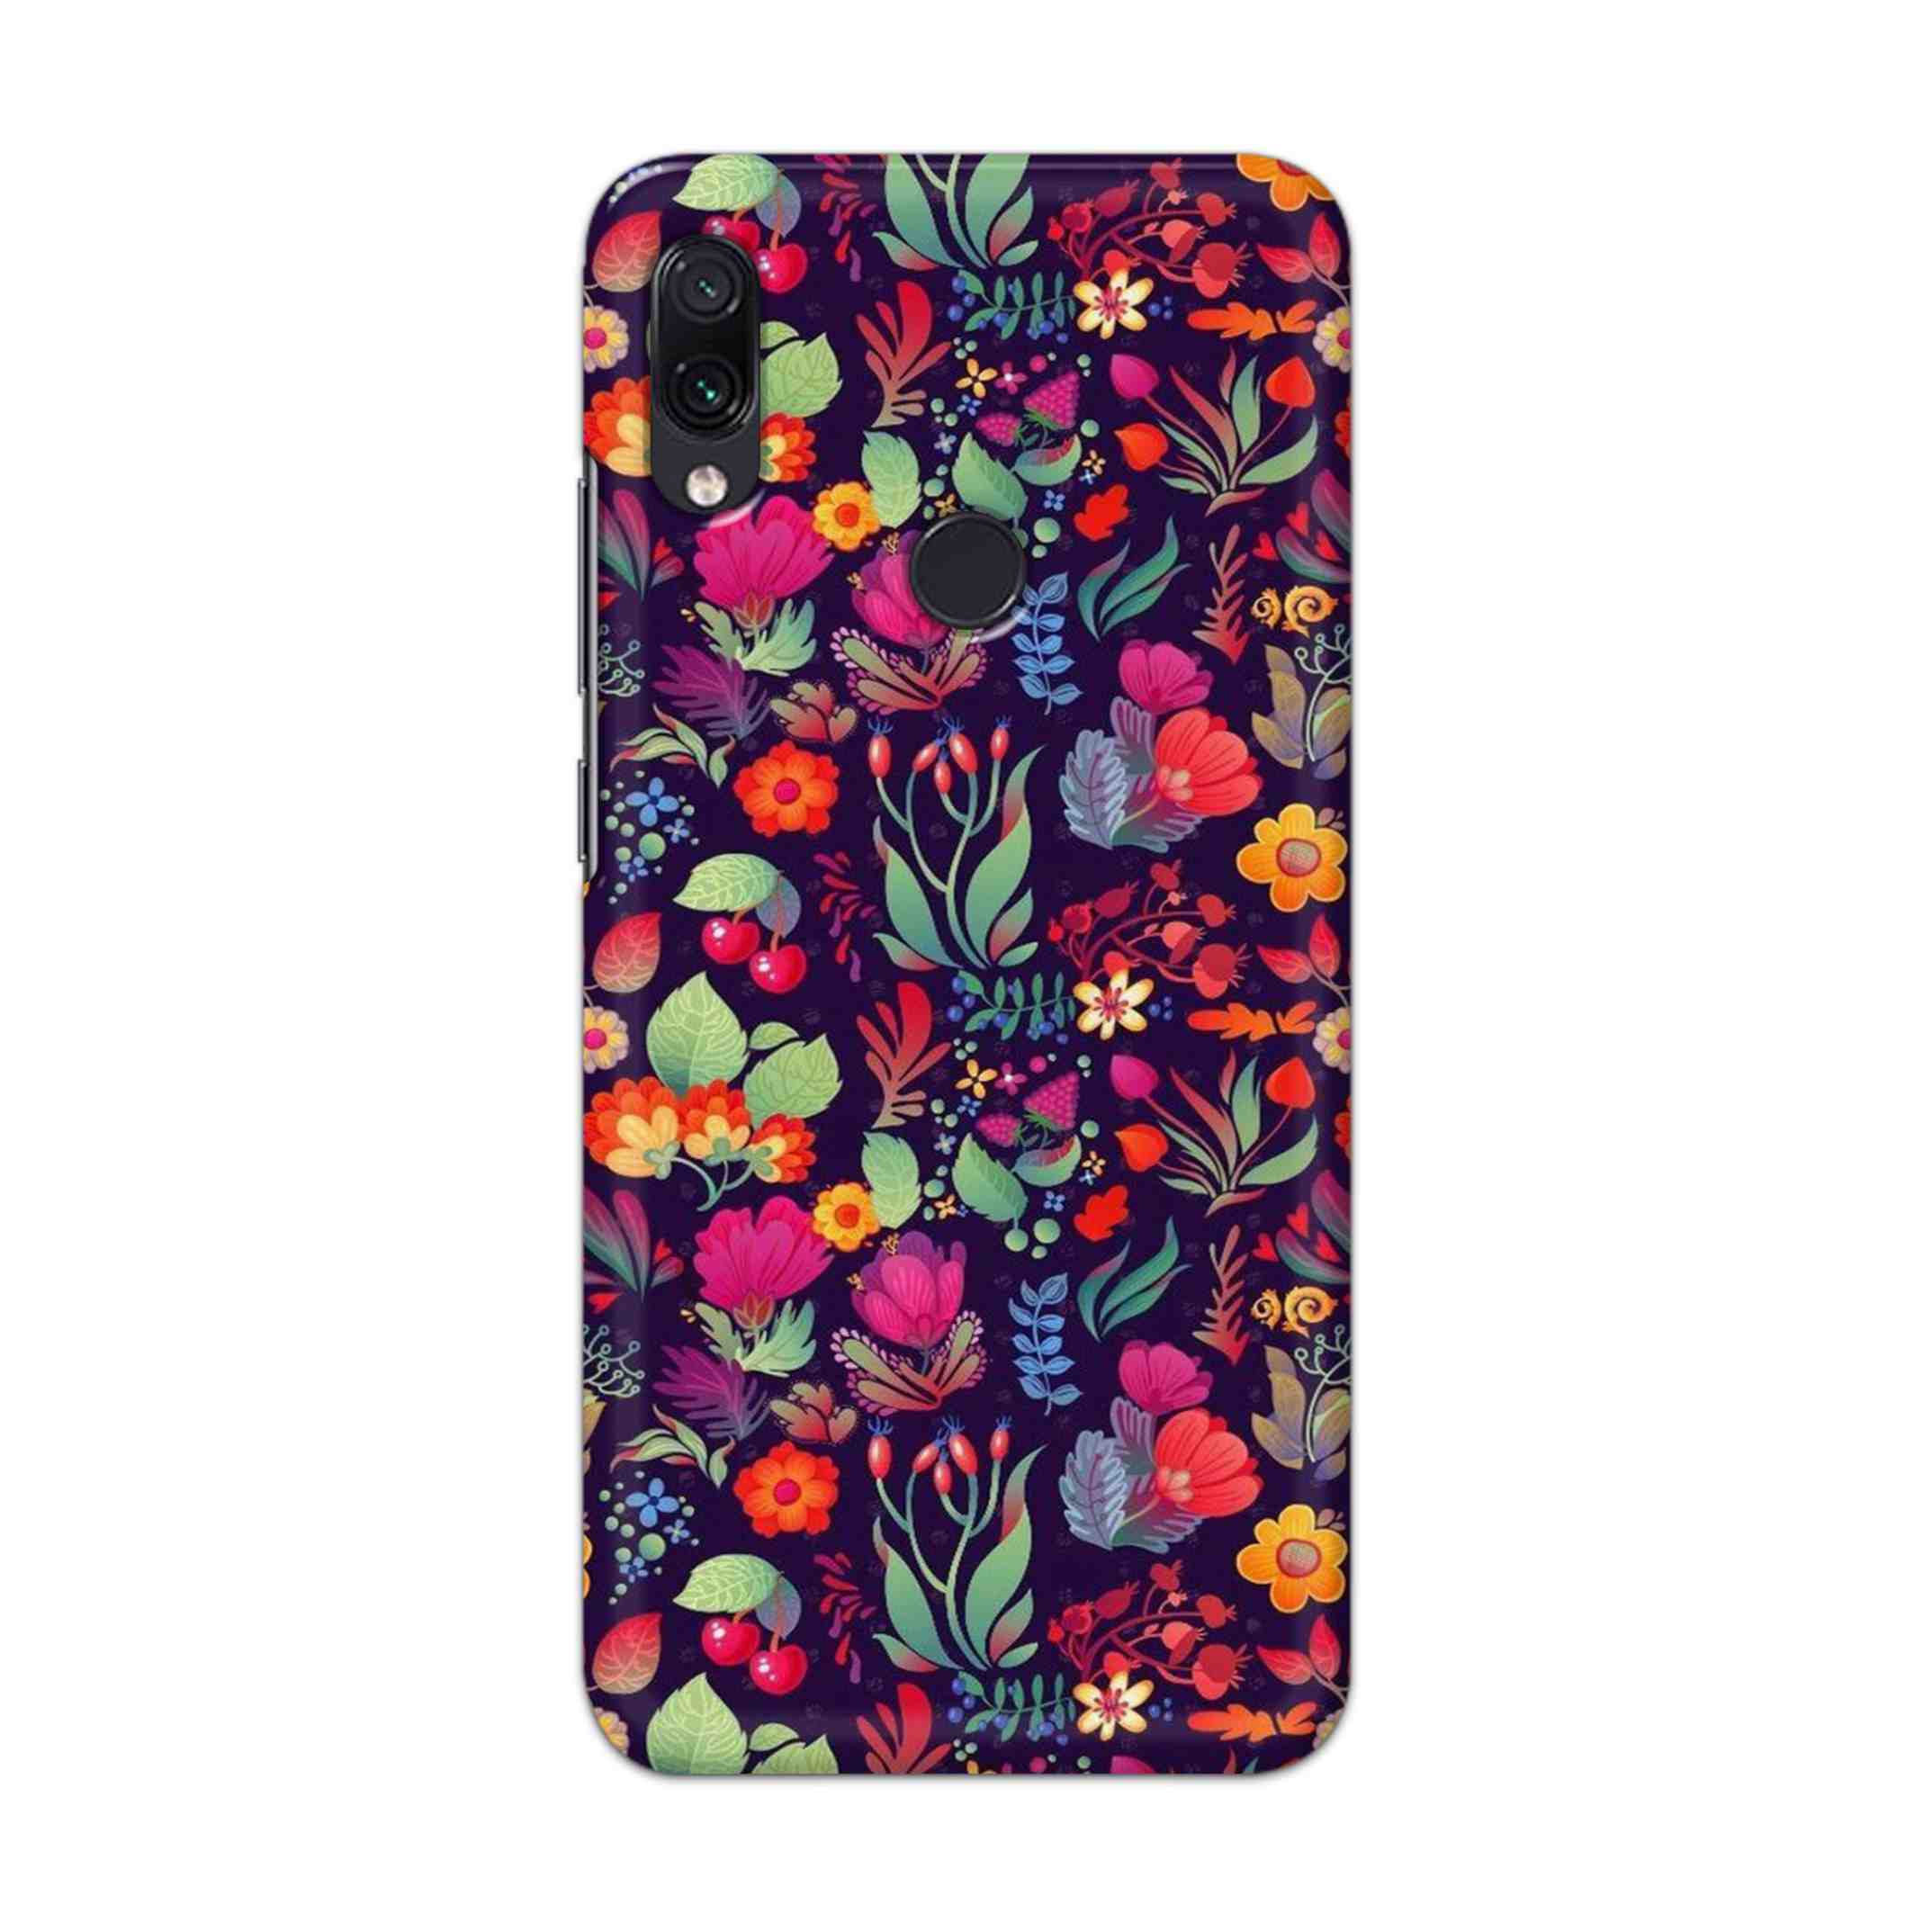 Buy Fruits Flower Hard Back Mobile Phone Case Cover For Xiaomi Redmi 7 Online